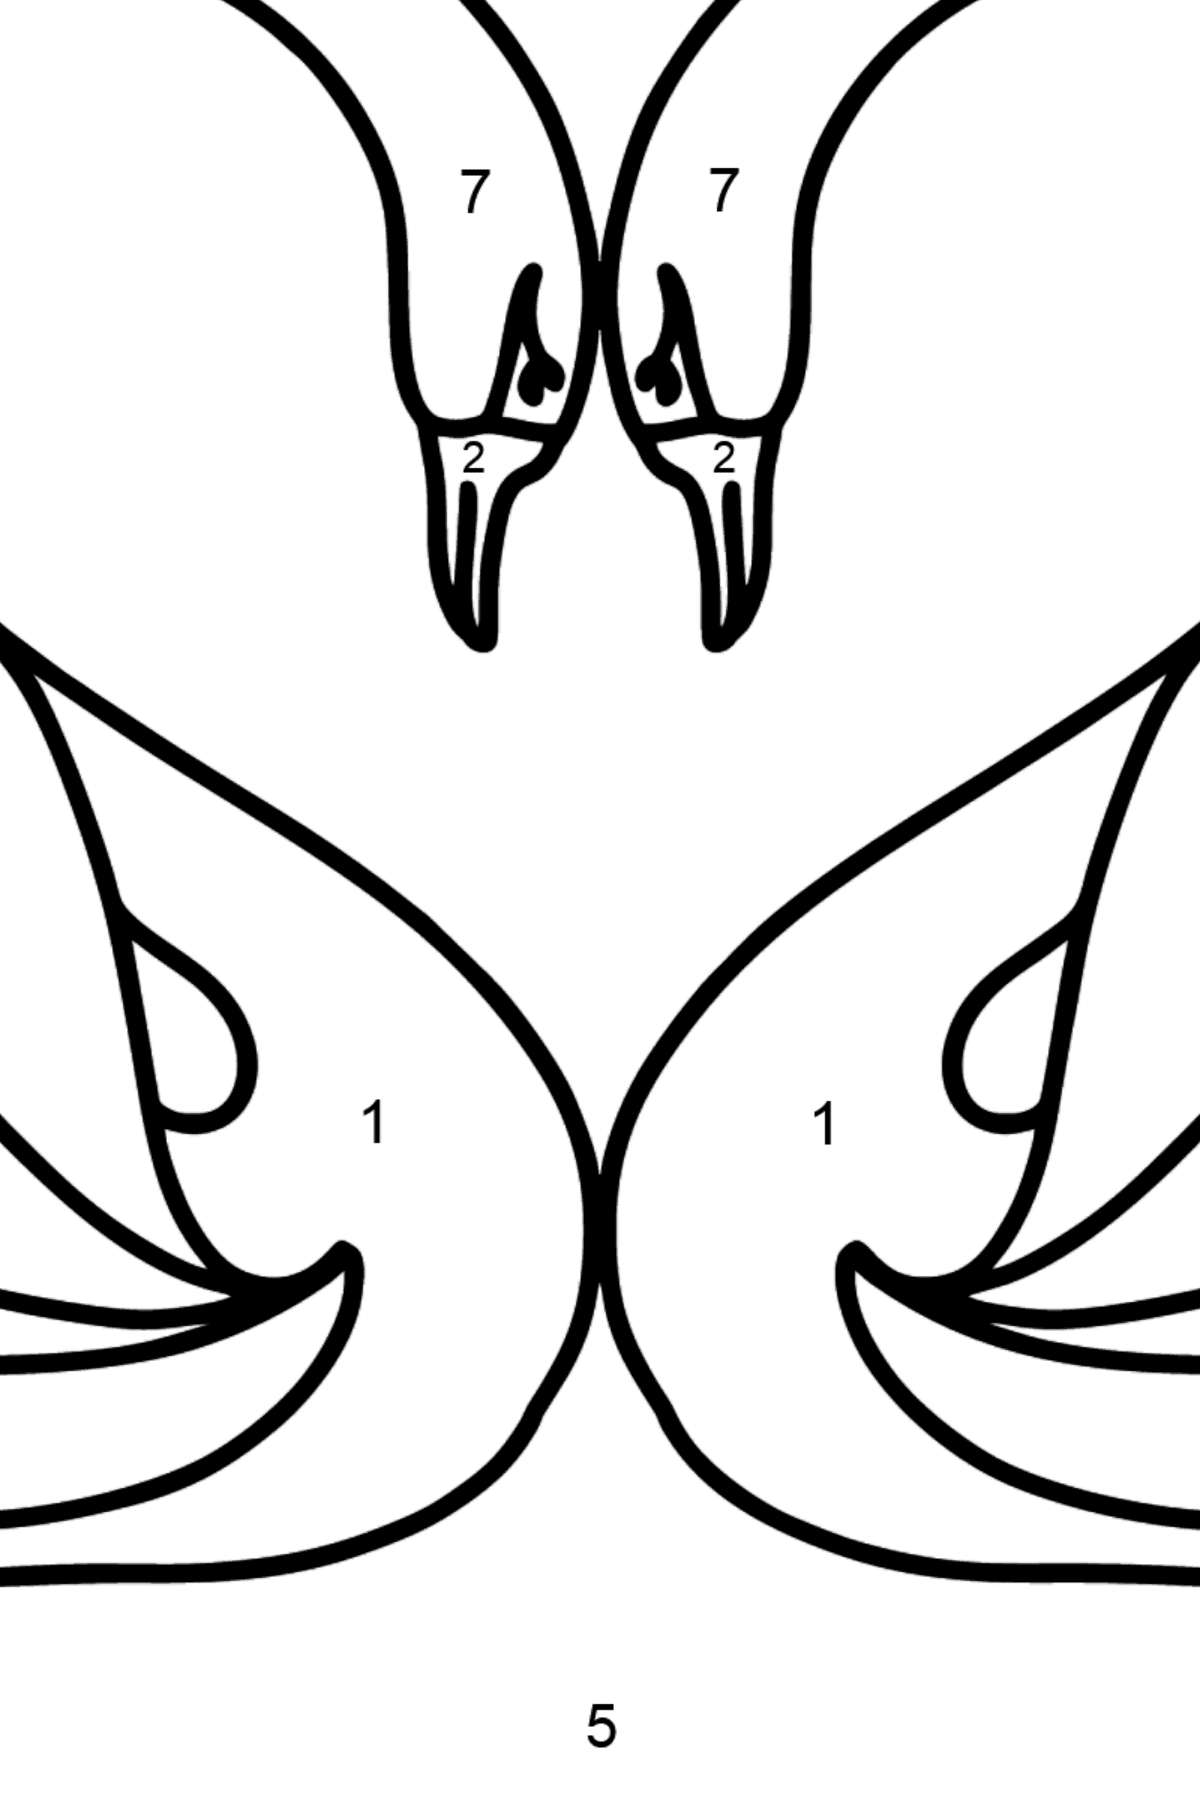 Black Swans coloring page - Coloring by Numbers for Kids